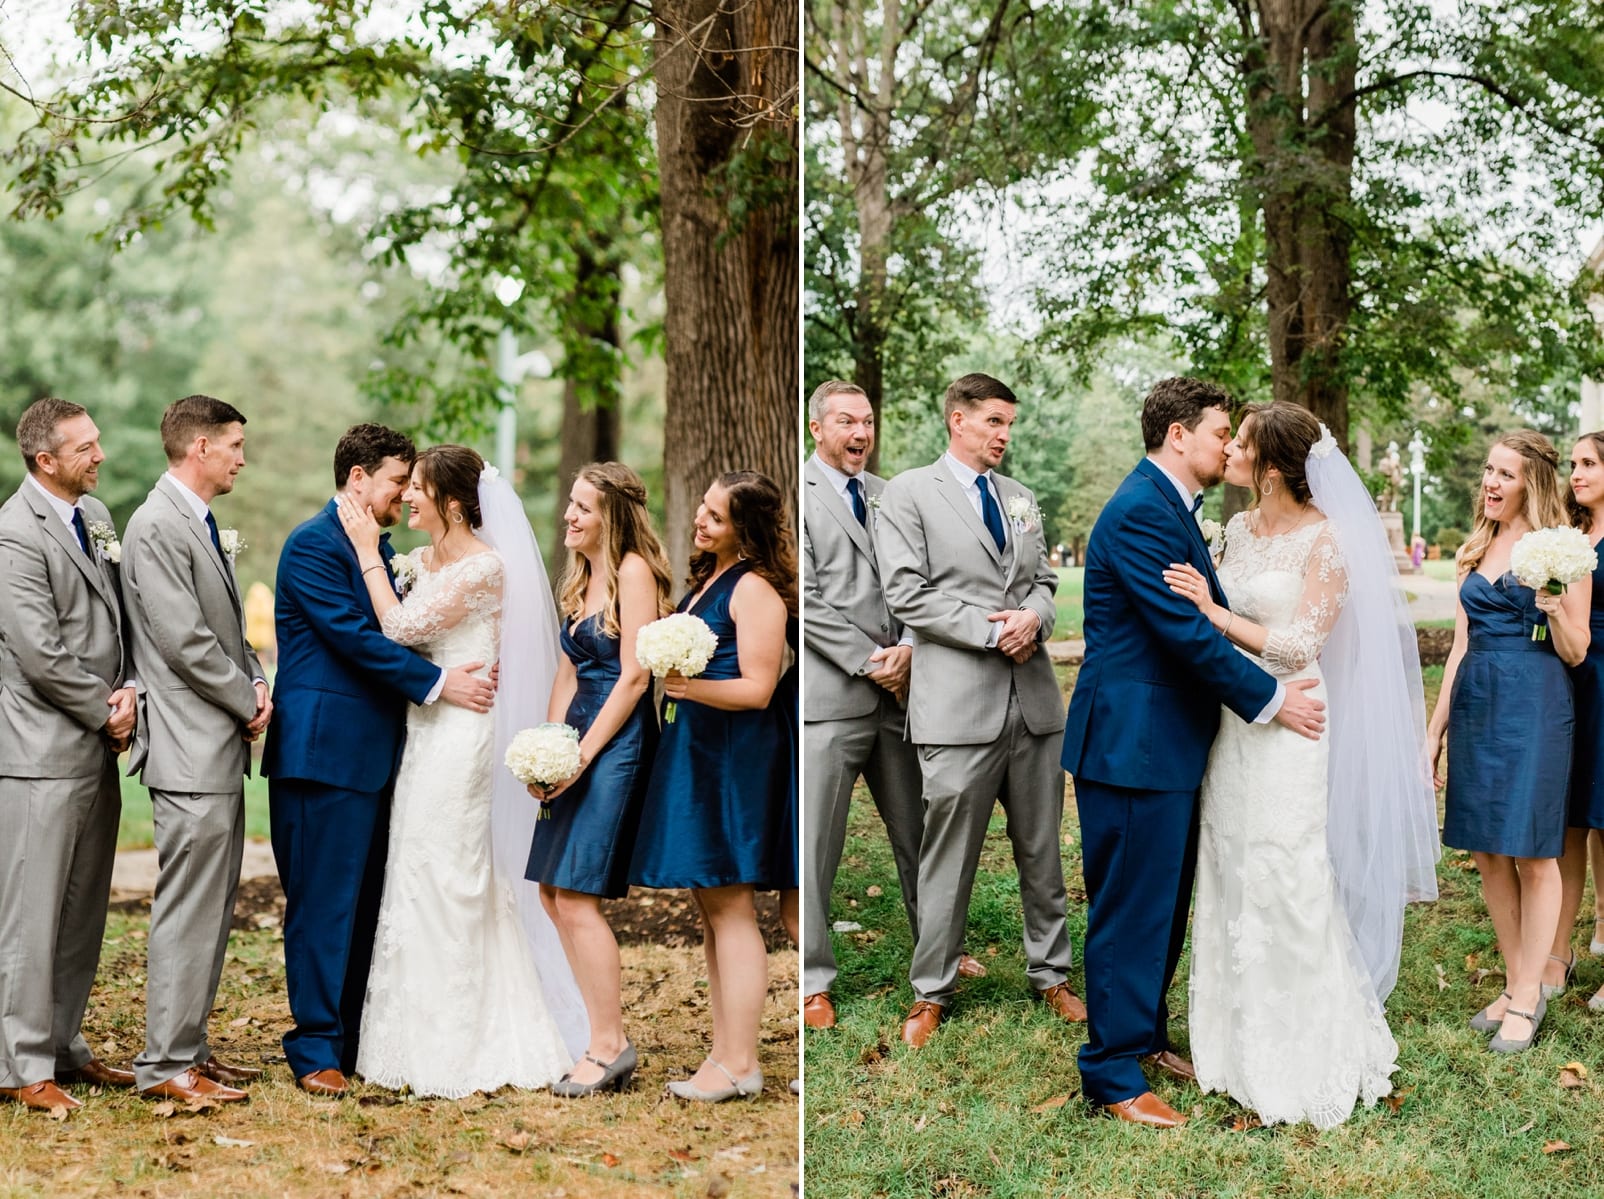 Raleigh Capital Grounds wedding party cheering while bride and groom kiss photo